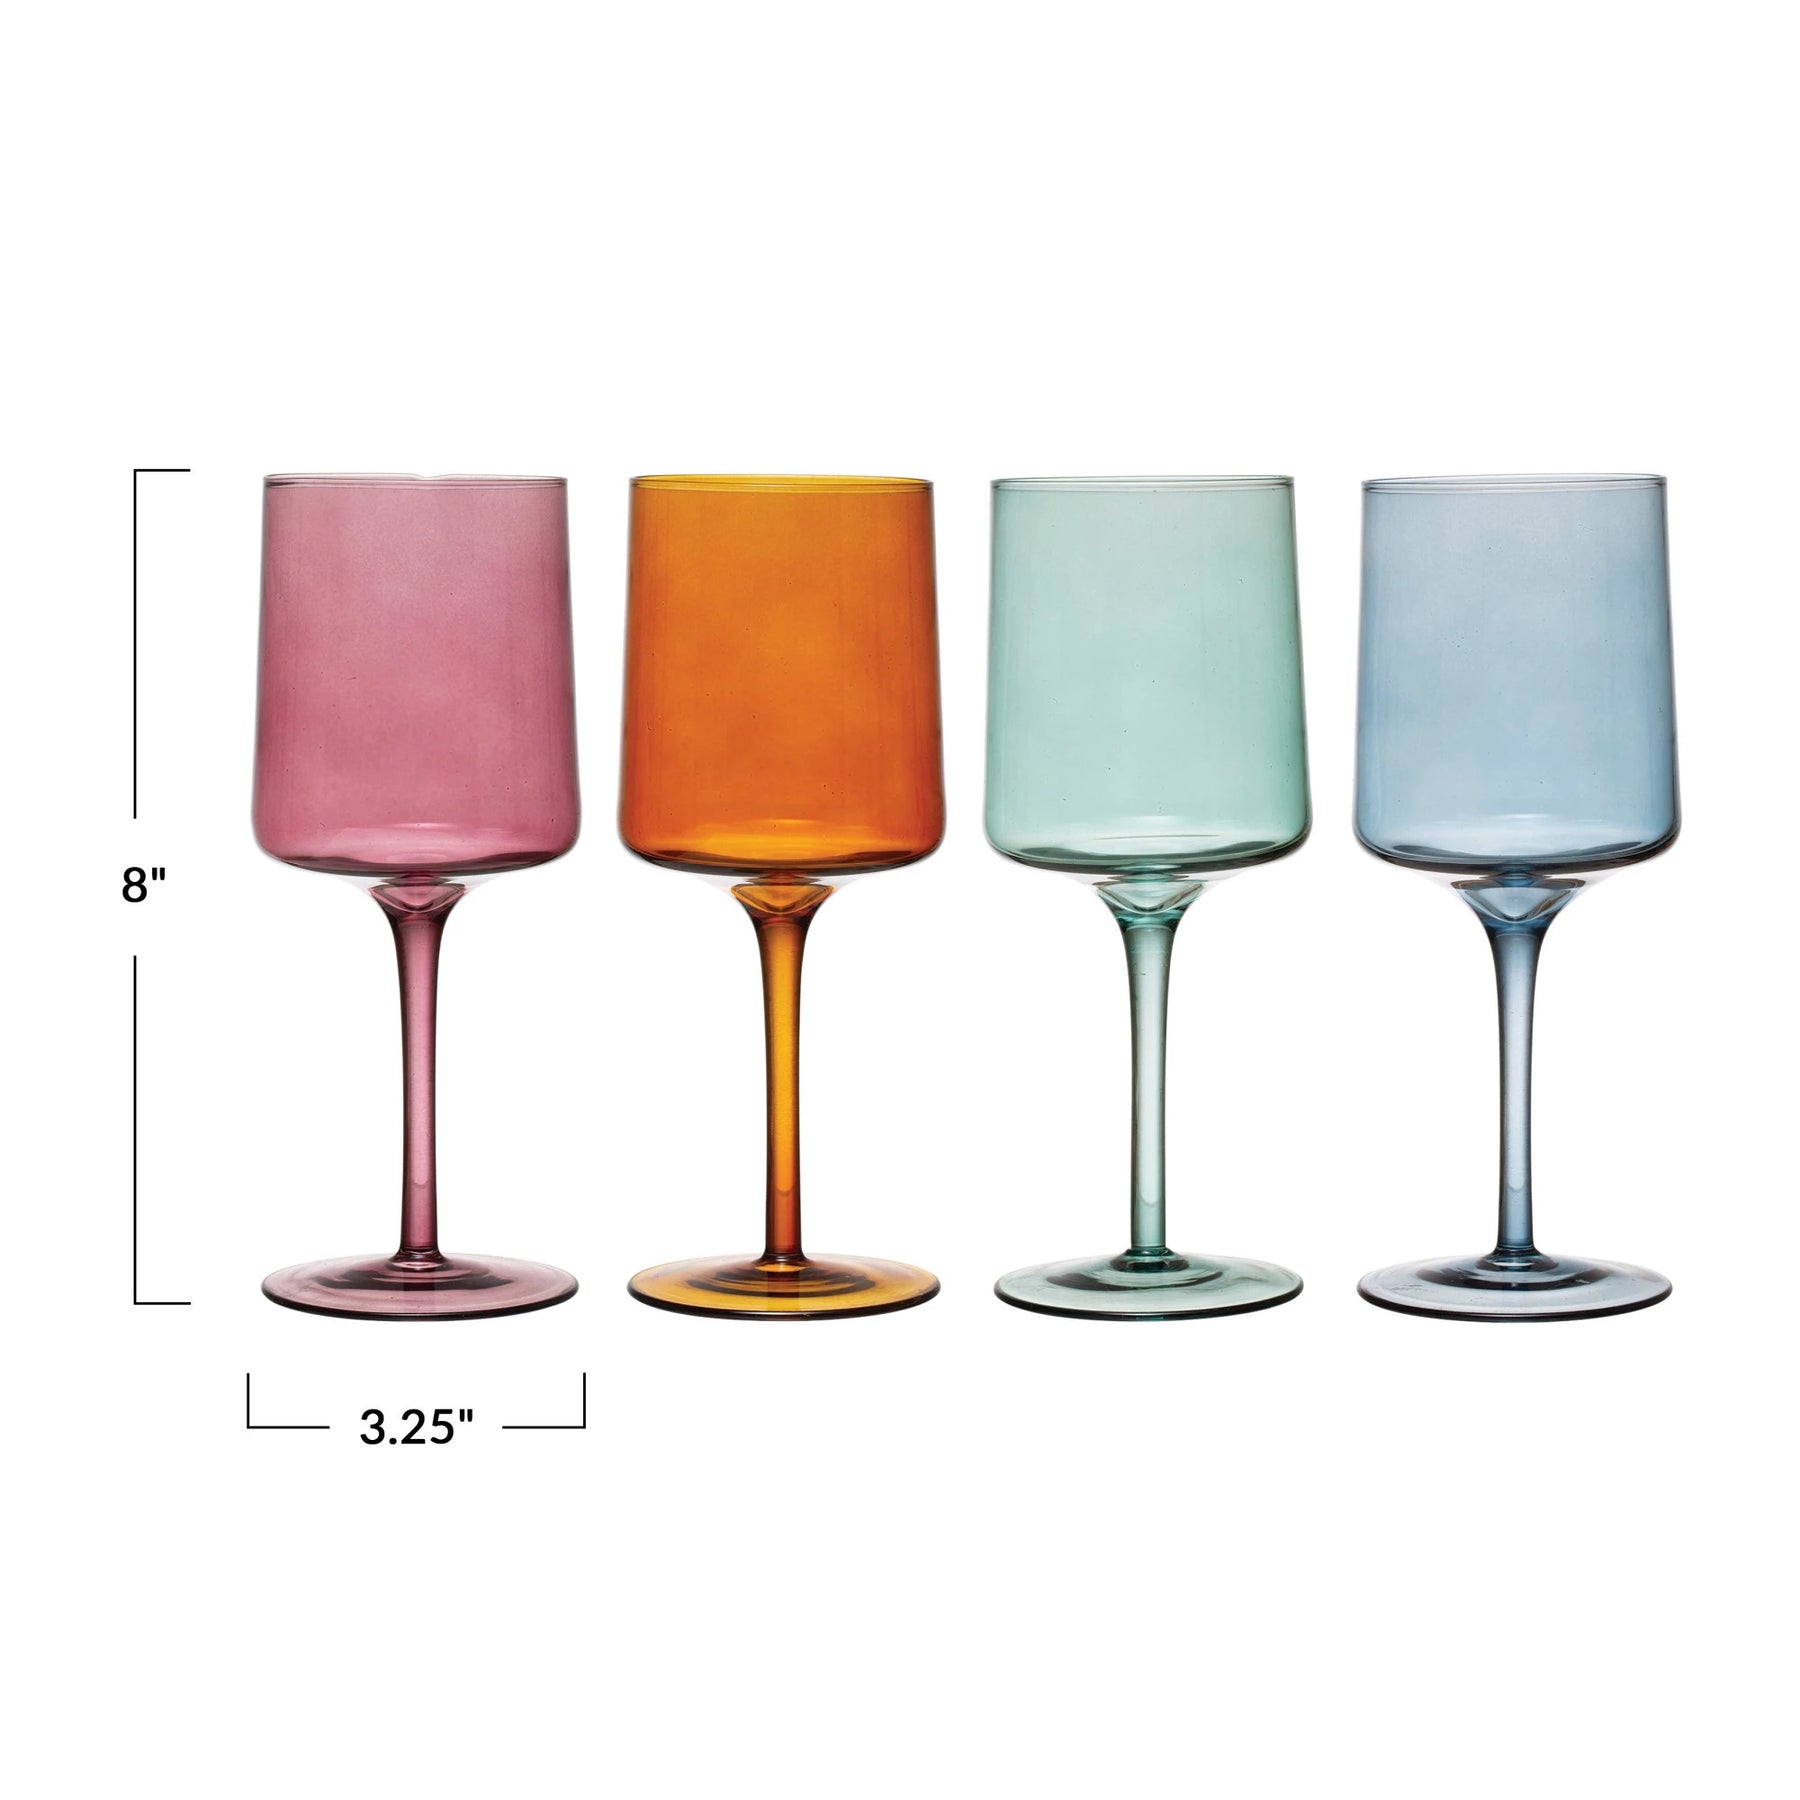 Southern Living Colored Stemmed Blown Glass Wine Glasses Set of 4 - Rosewood